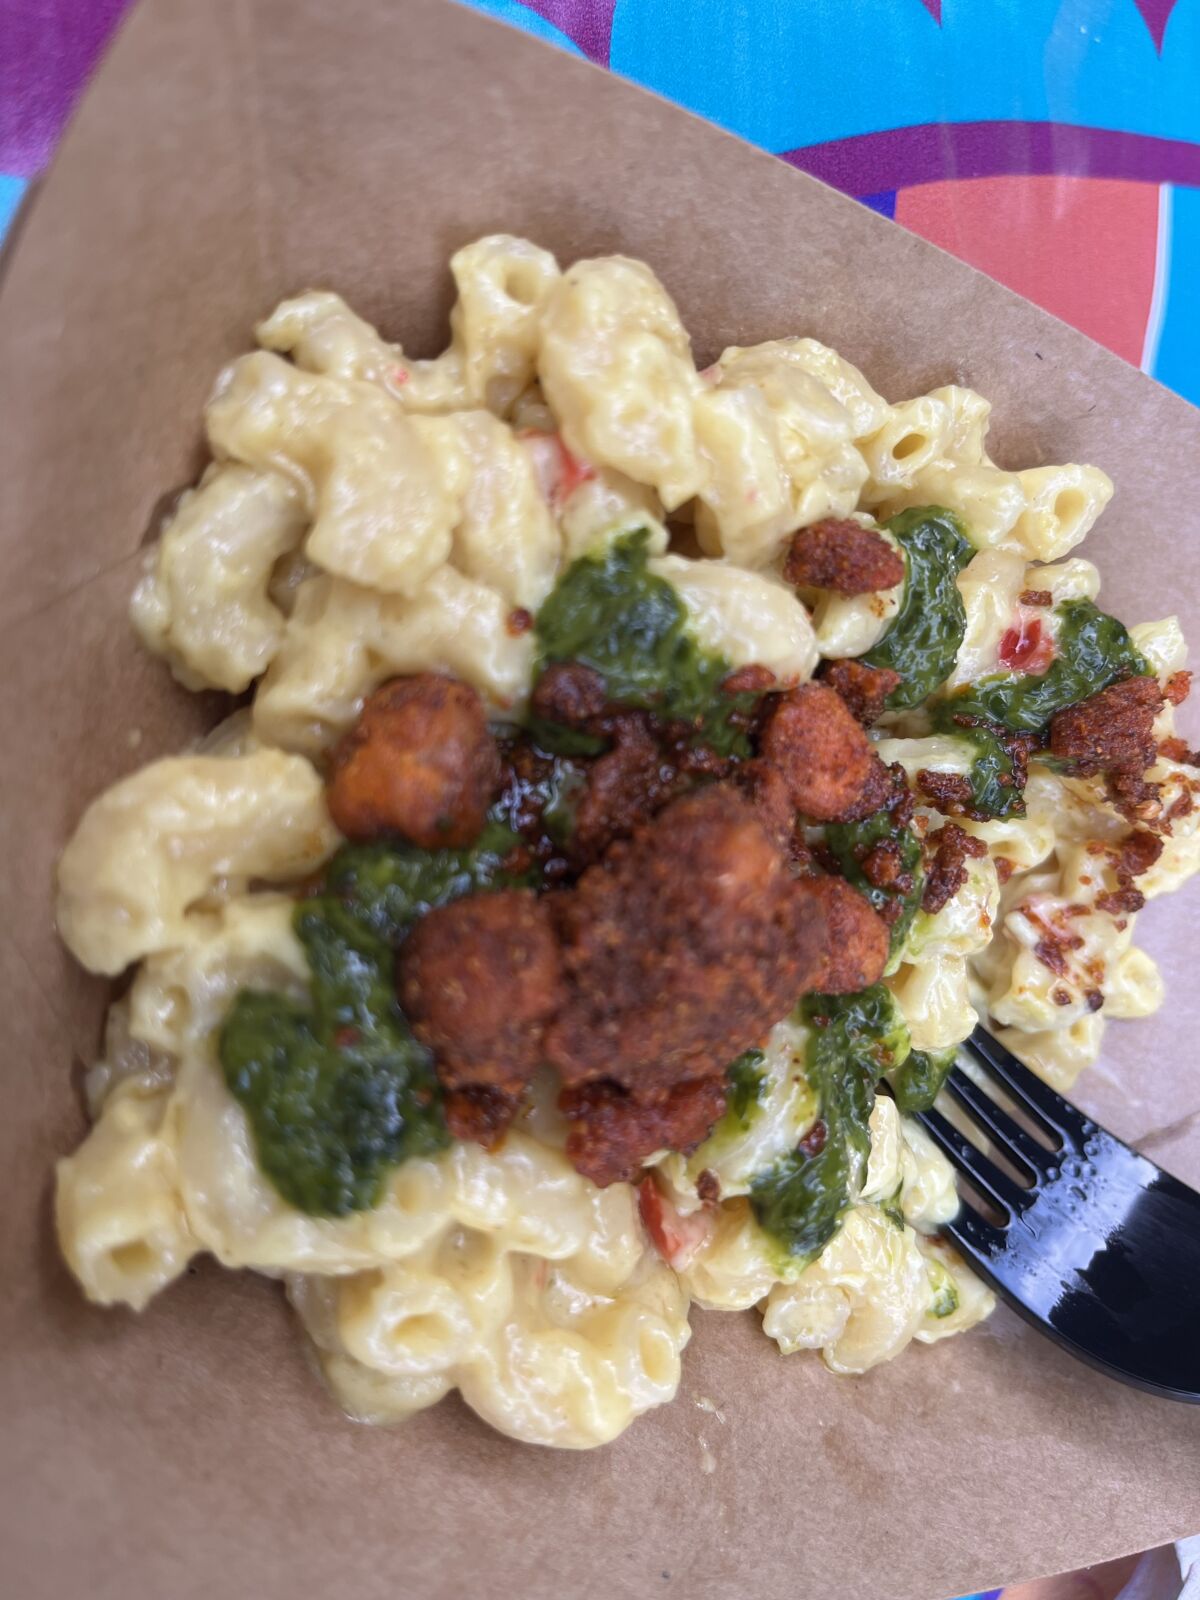 Curry mac 'n' cheese at Disney California Adventure's 2022 Festive Foods Marketplace.